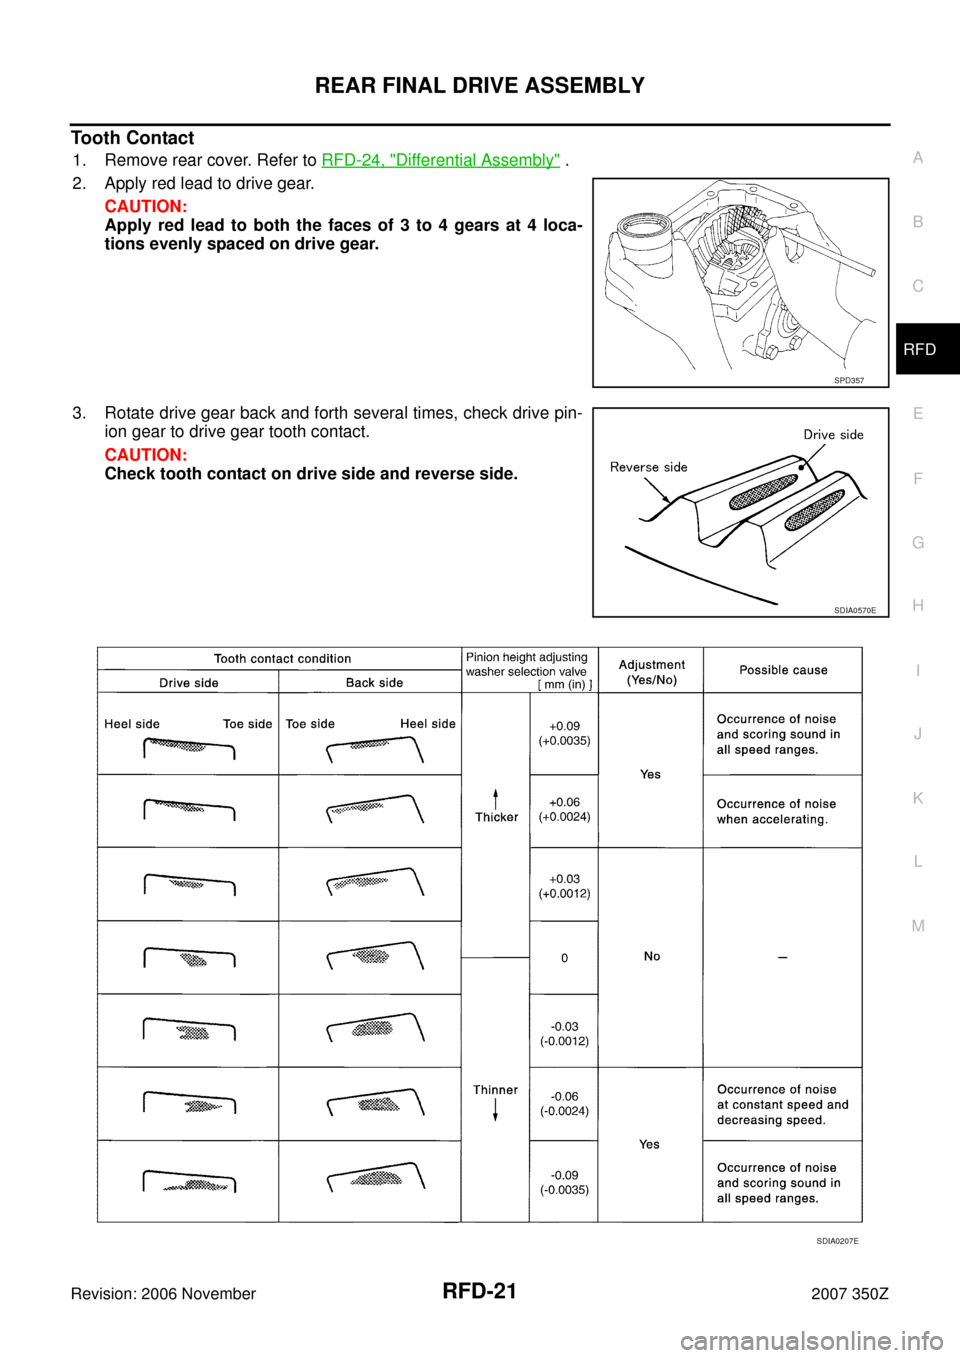 NISSAN 350Z 2007 Z33 Rear Final Drive Owners Manual REAR FINAL DRIVE ASSEMBLY
RFD-21
C
E
F
G
H
I
J
K
L
MA
B
RFD
Revision: 2006 November2007 350Z
Tooth Contact
1. Remove rear cover. Refer to RFD-24, "Differential Assembly" .
2. Apply red lead to drive g